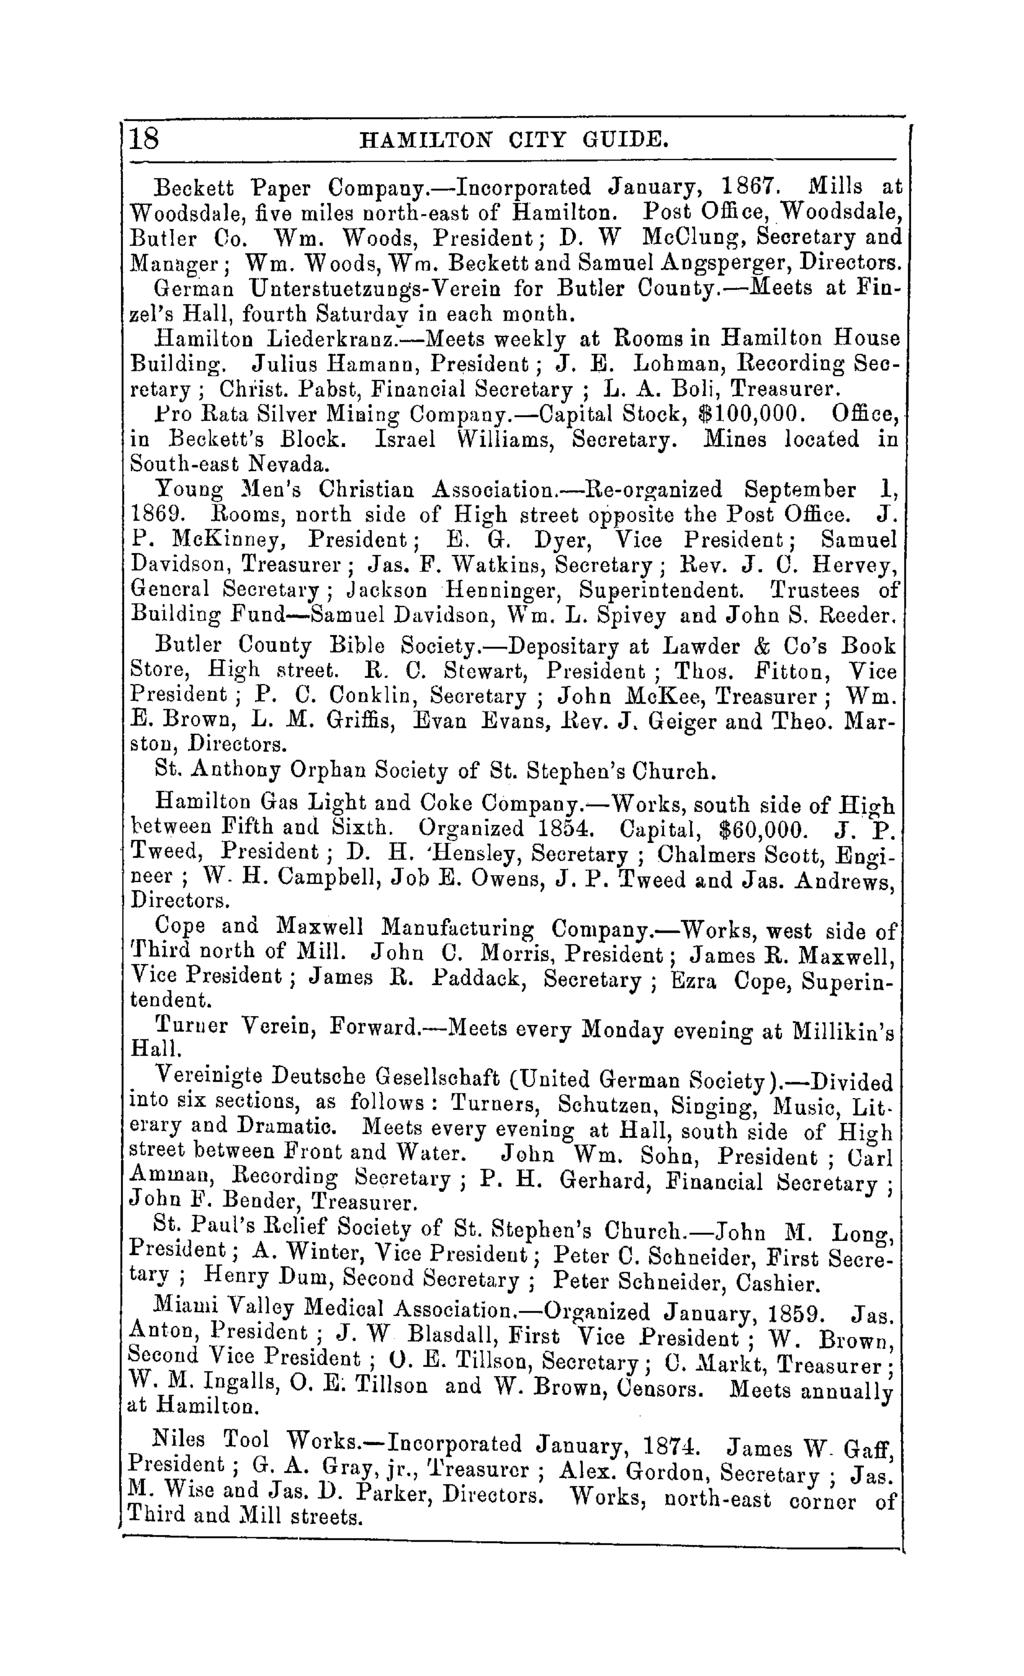 18 HAMILTON CITY GUIDE. Beckett Paper Company.-Incorporated January, 1867. Mills at Woodsdale, five miles north-east of Hamilton. Post Office,Woodsdale, Butler 00. Wm. Woods, President; D.